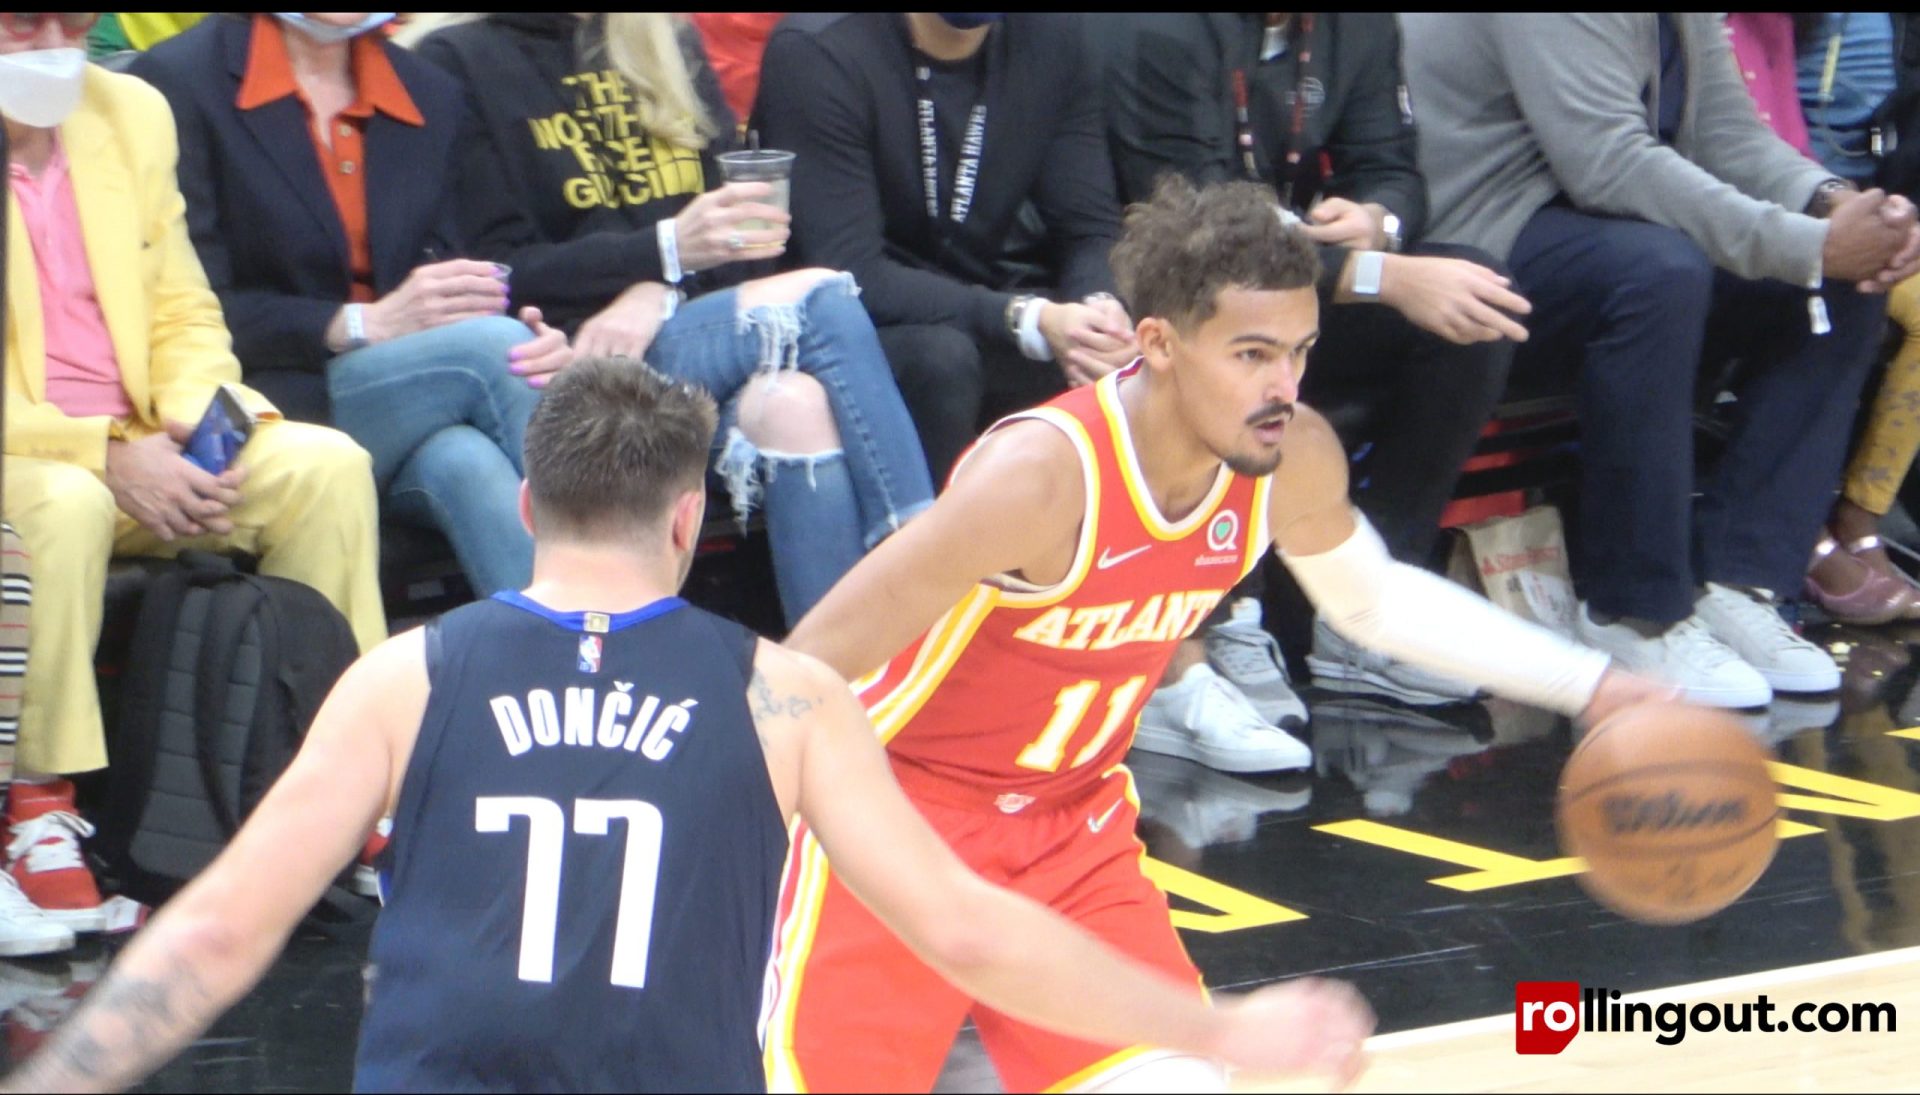 NBA players confirm once again: They don't like Trae Young